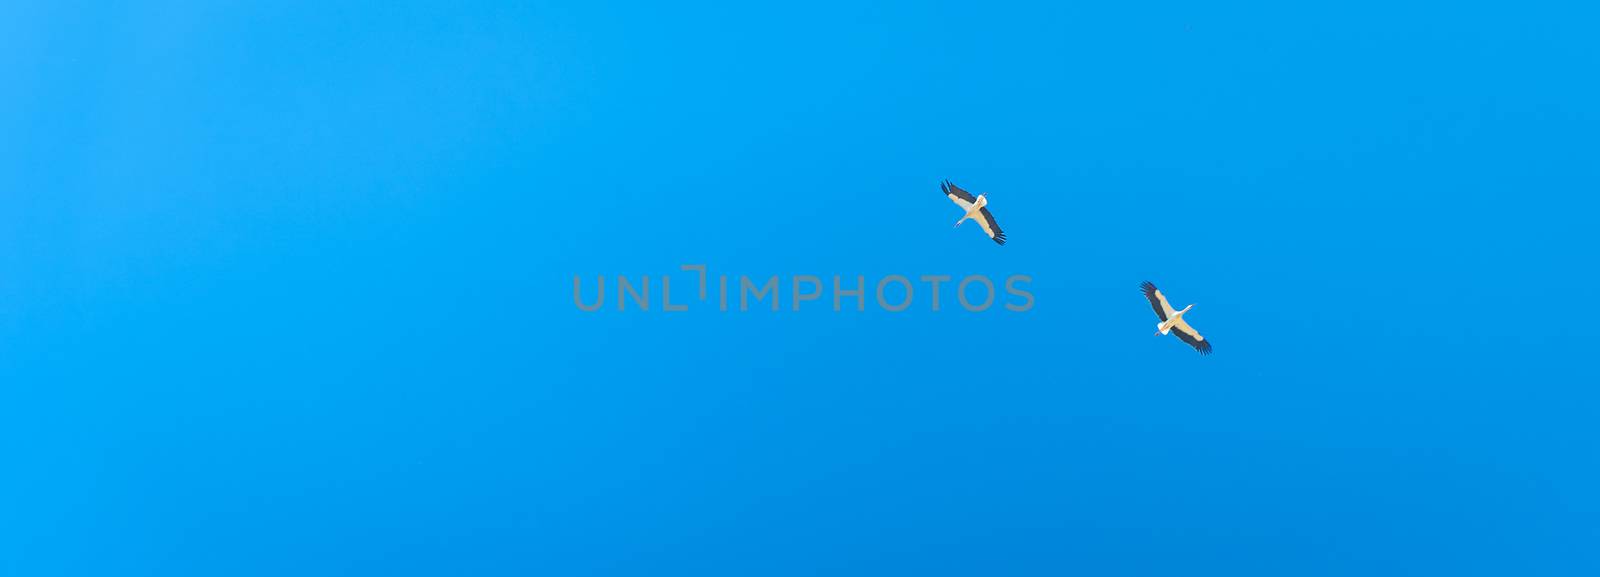 couple of stork in the blue sky. banner with copy space.